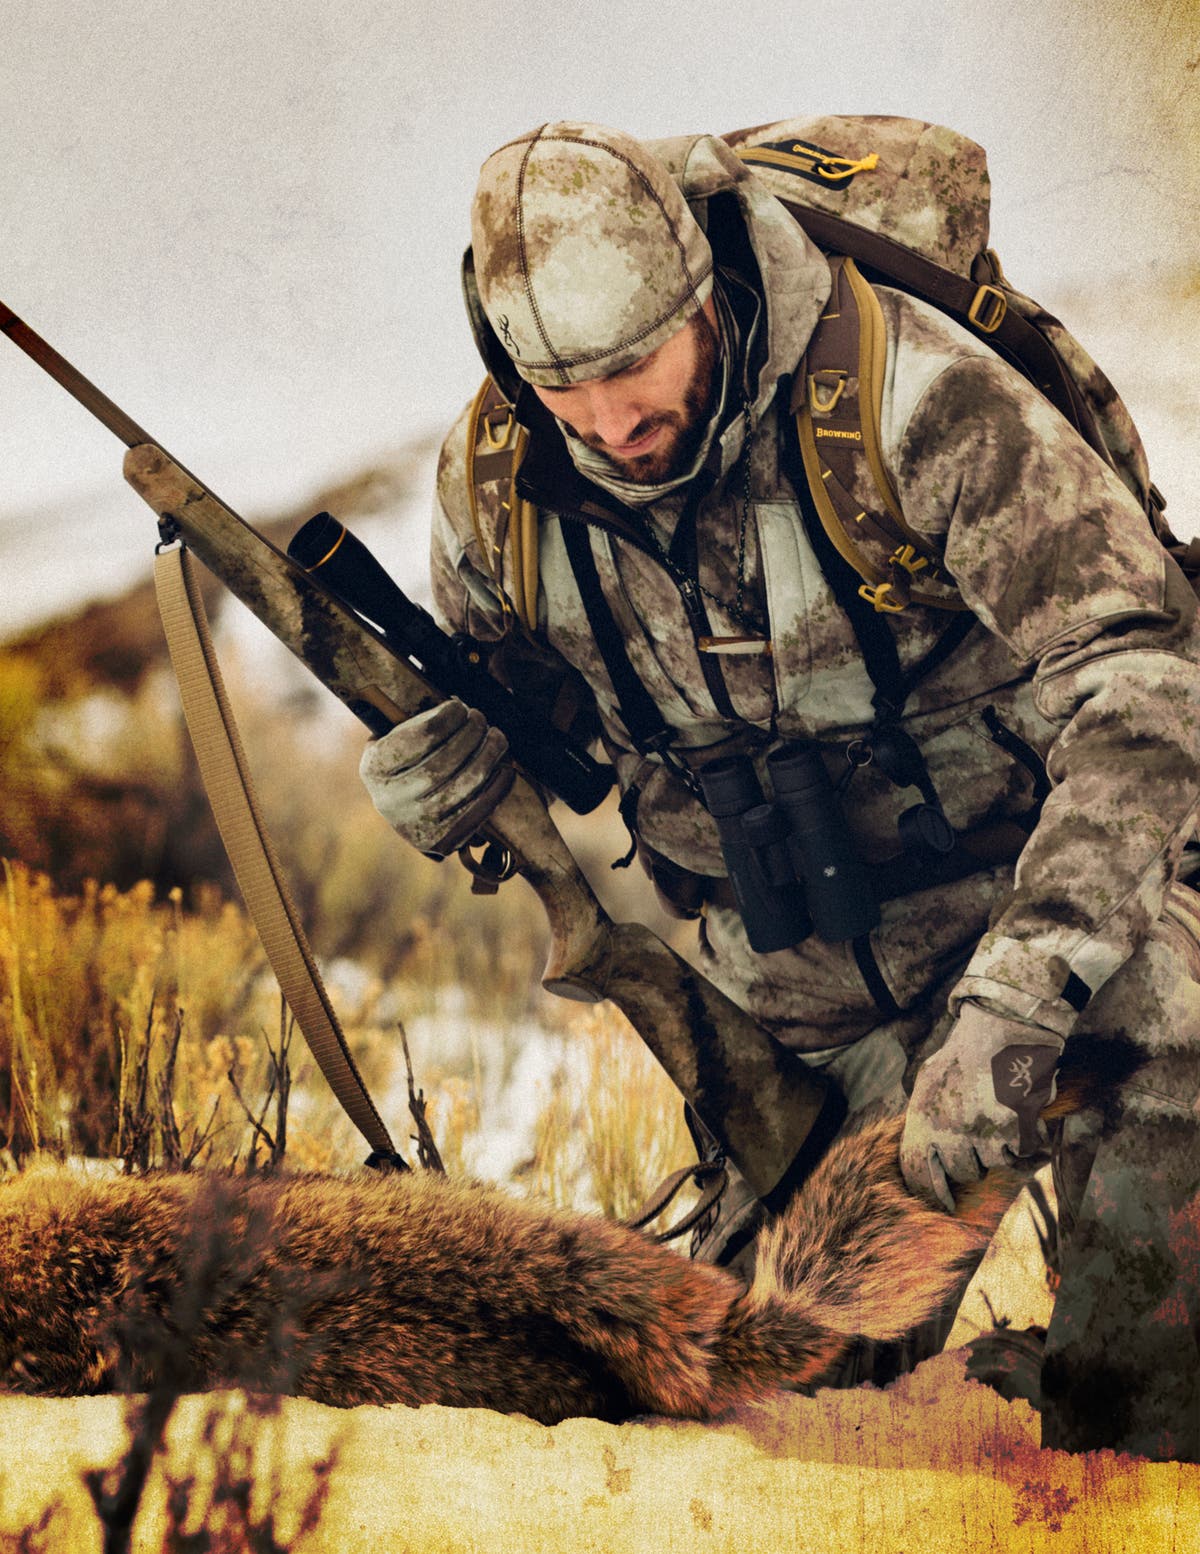 X-Bolt bolt action rifle Coyote Hunting